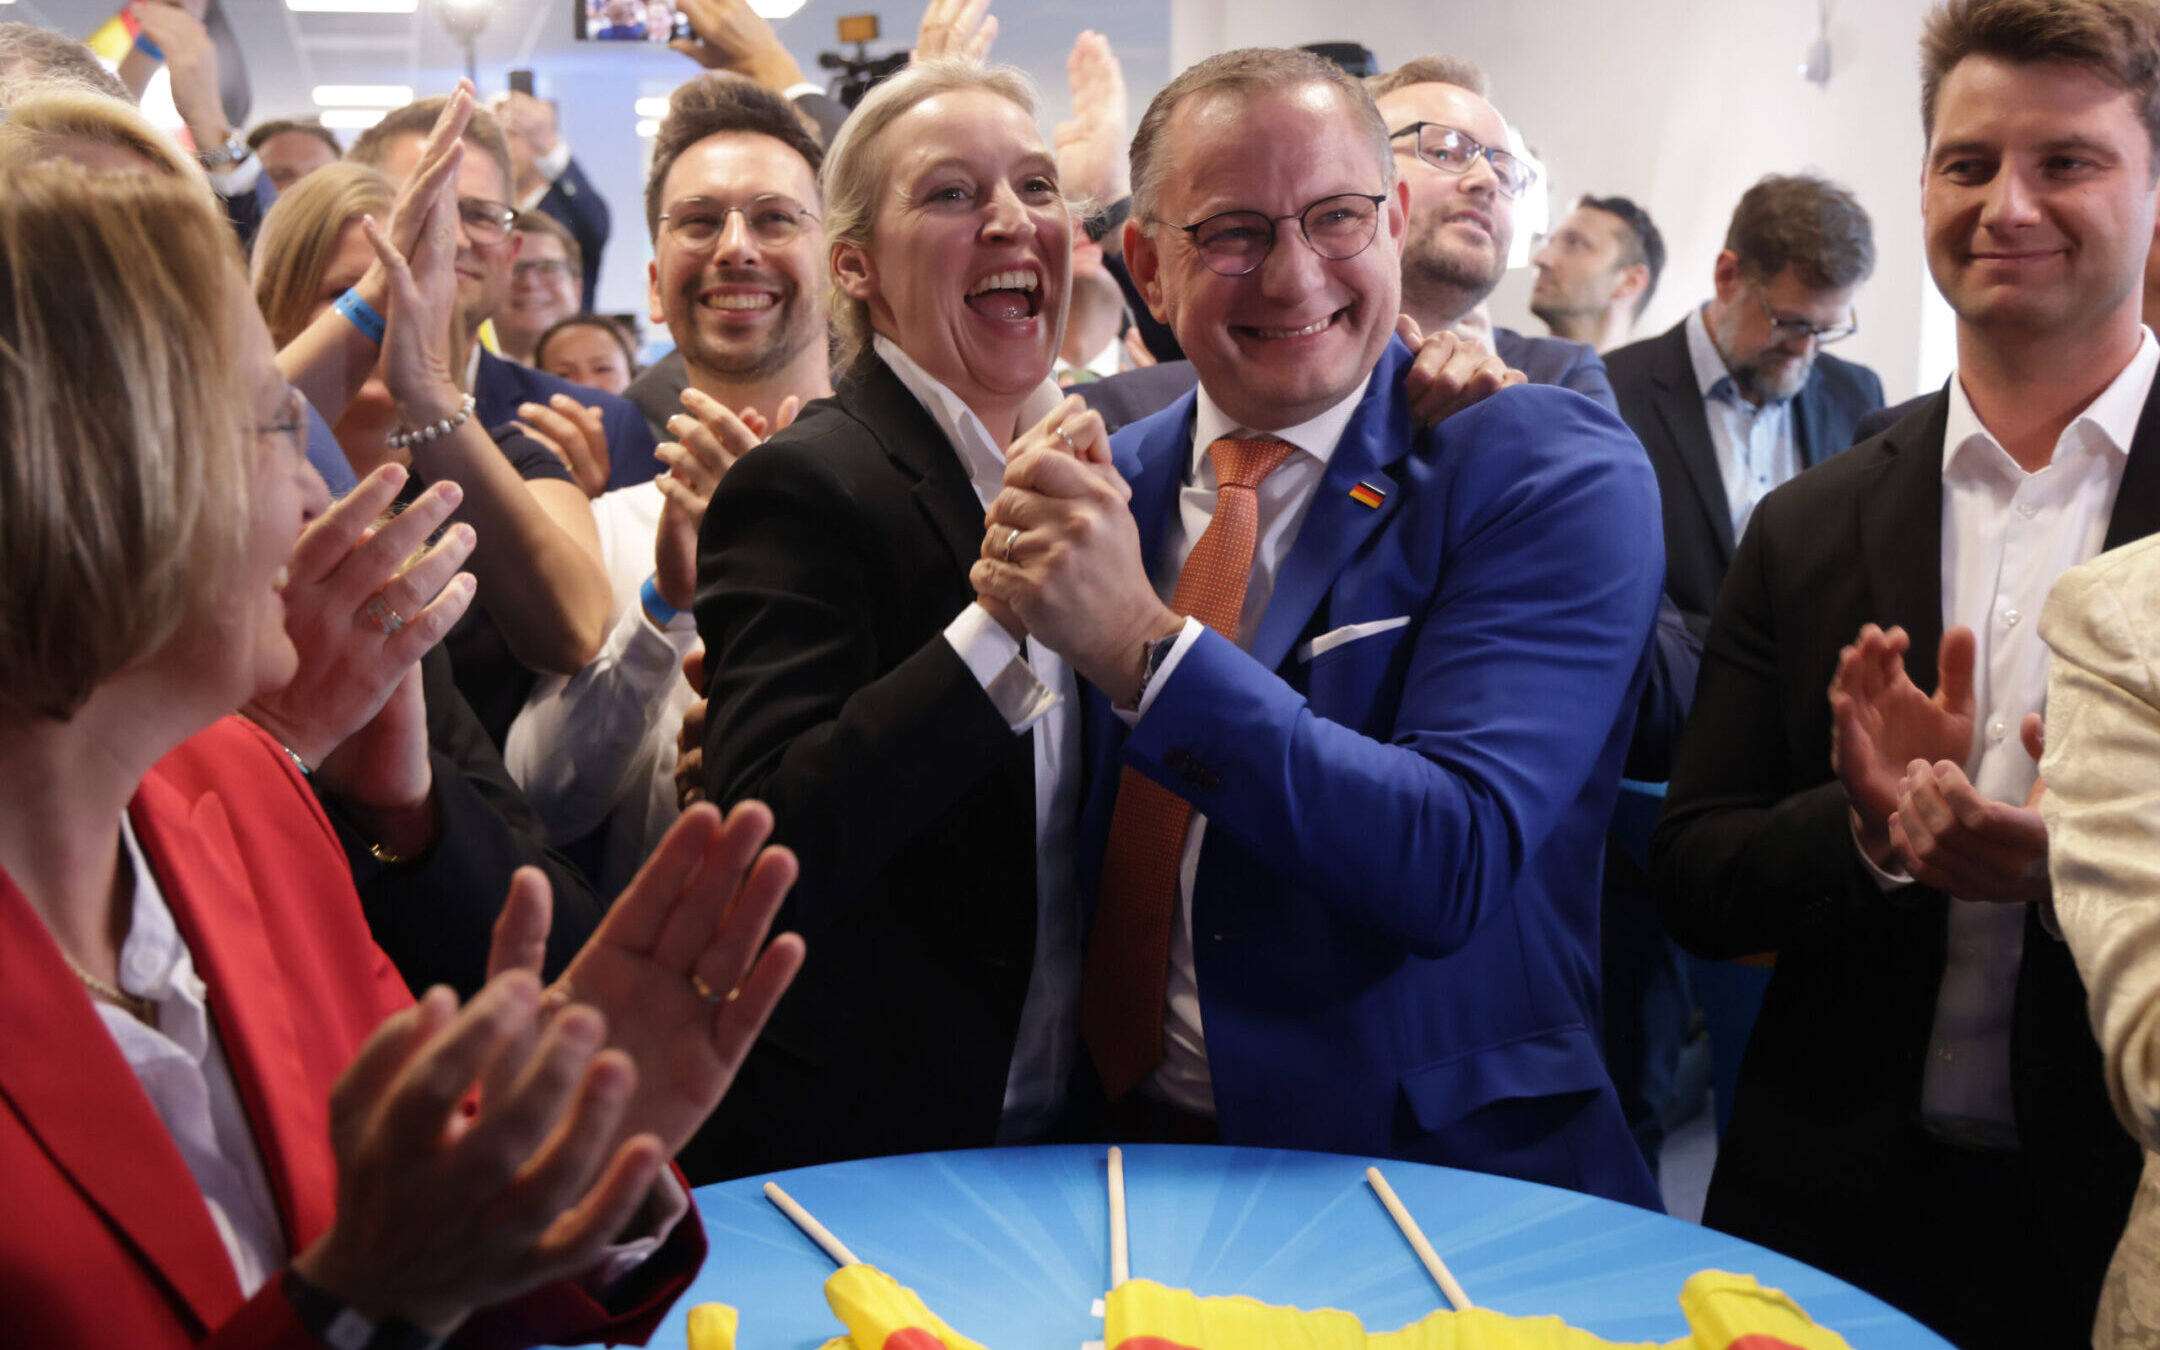 Tino Chrupalla and Alice Weidel, co-leaders of the far-right Alternative for Germany political party, celebrate at the AfD election evening gathering following the release of initial election results in European parliamentary elections in Berlin, June 9. (Sean Gallup/Getty Images)